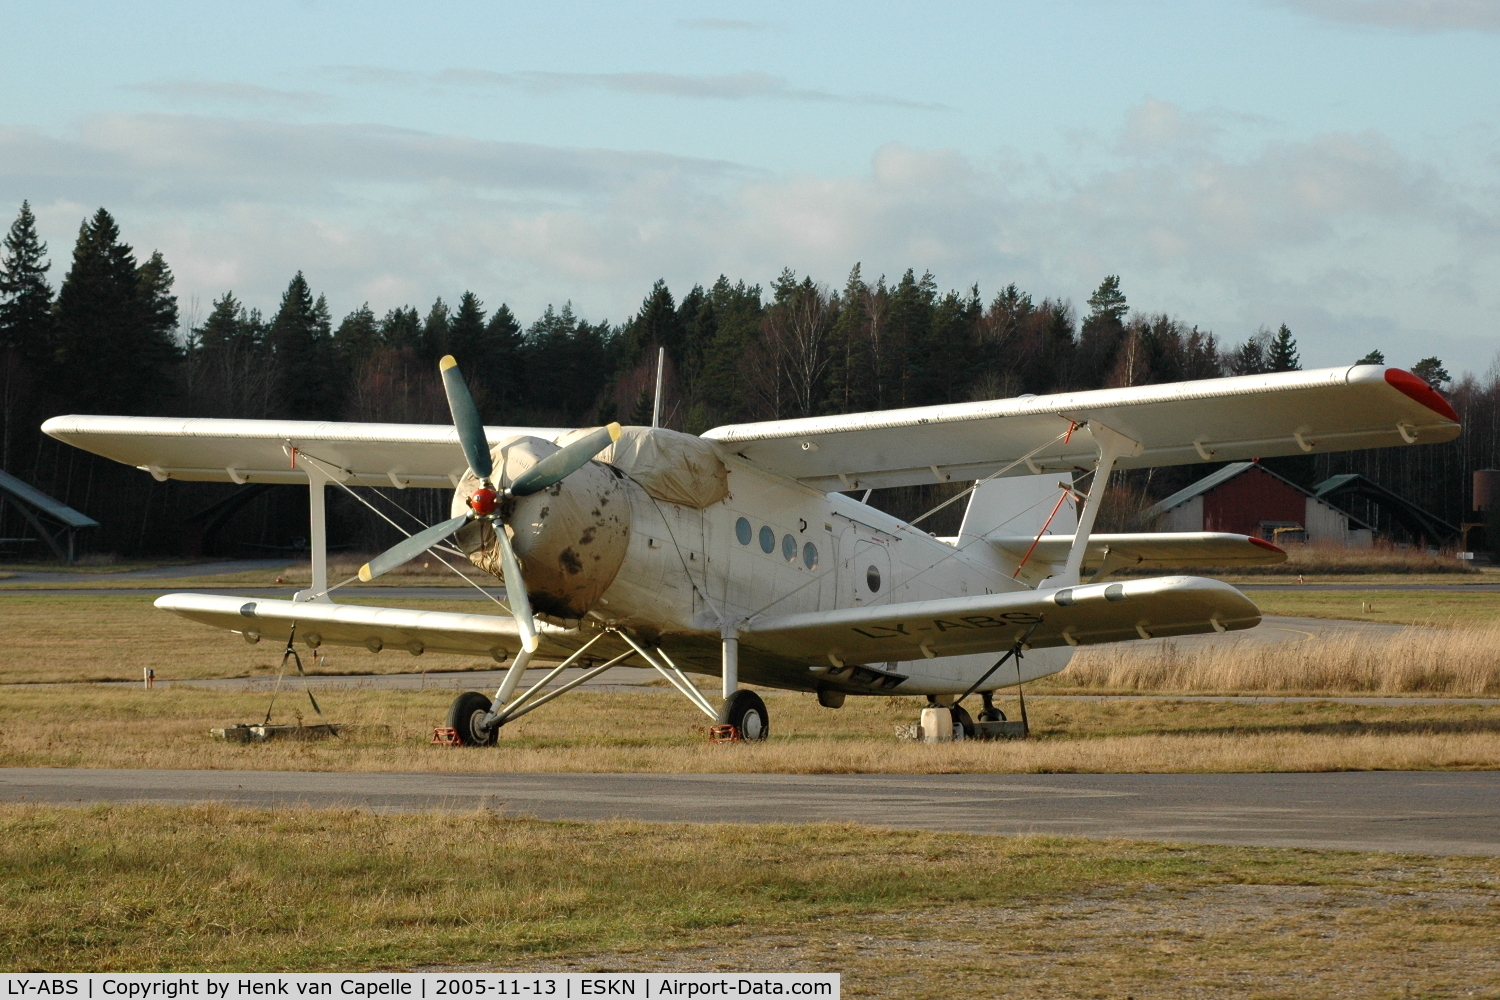 LY-ABS, 1989 PZL-Mielec An-2TP C/N 1G234-01, An-2TP parked at Nyköping Skavsta airport, Sweden.It was at the time being used for paradropping by Nyköpings Fallskärmsklubb.